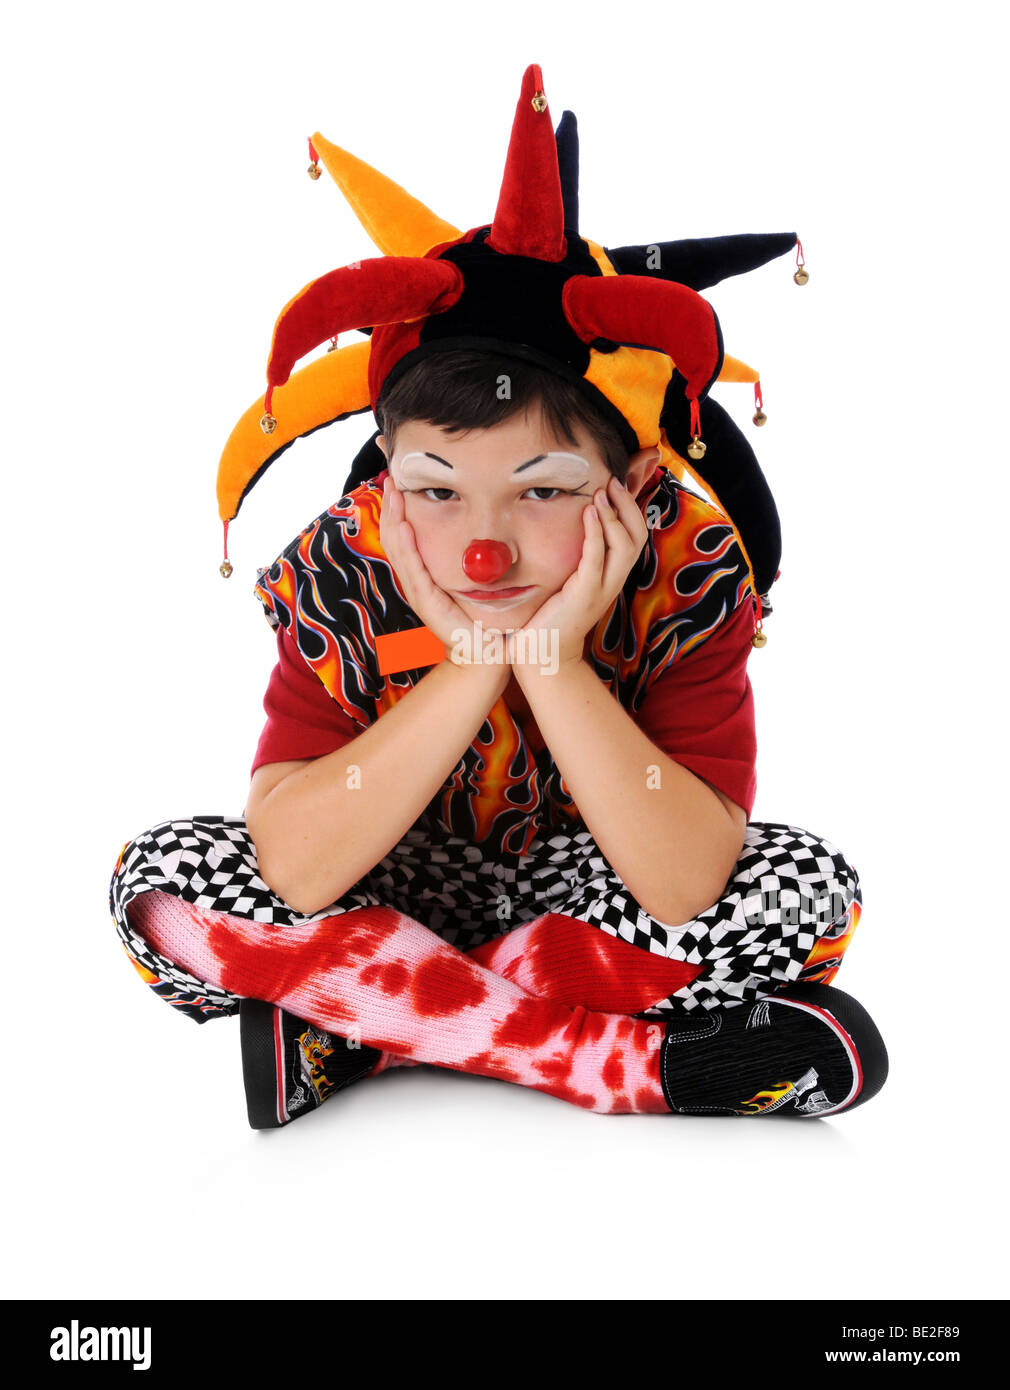 Portrait of young clown expressing sadness Stock Photo